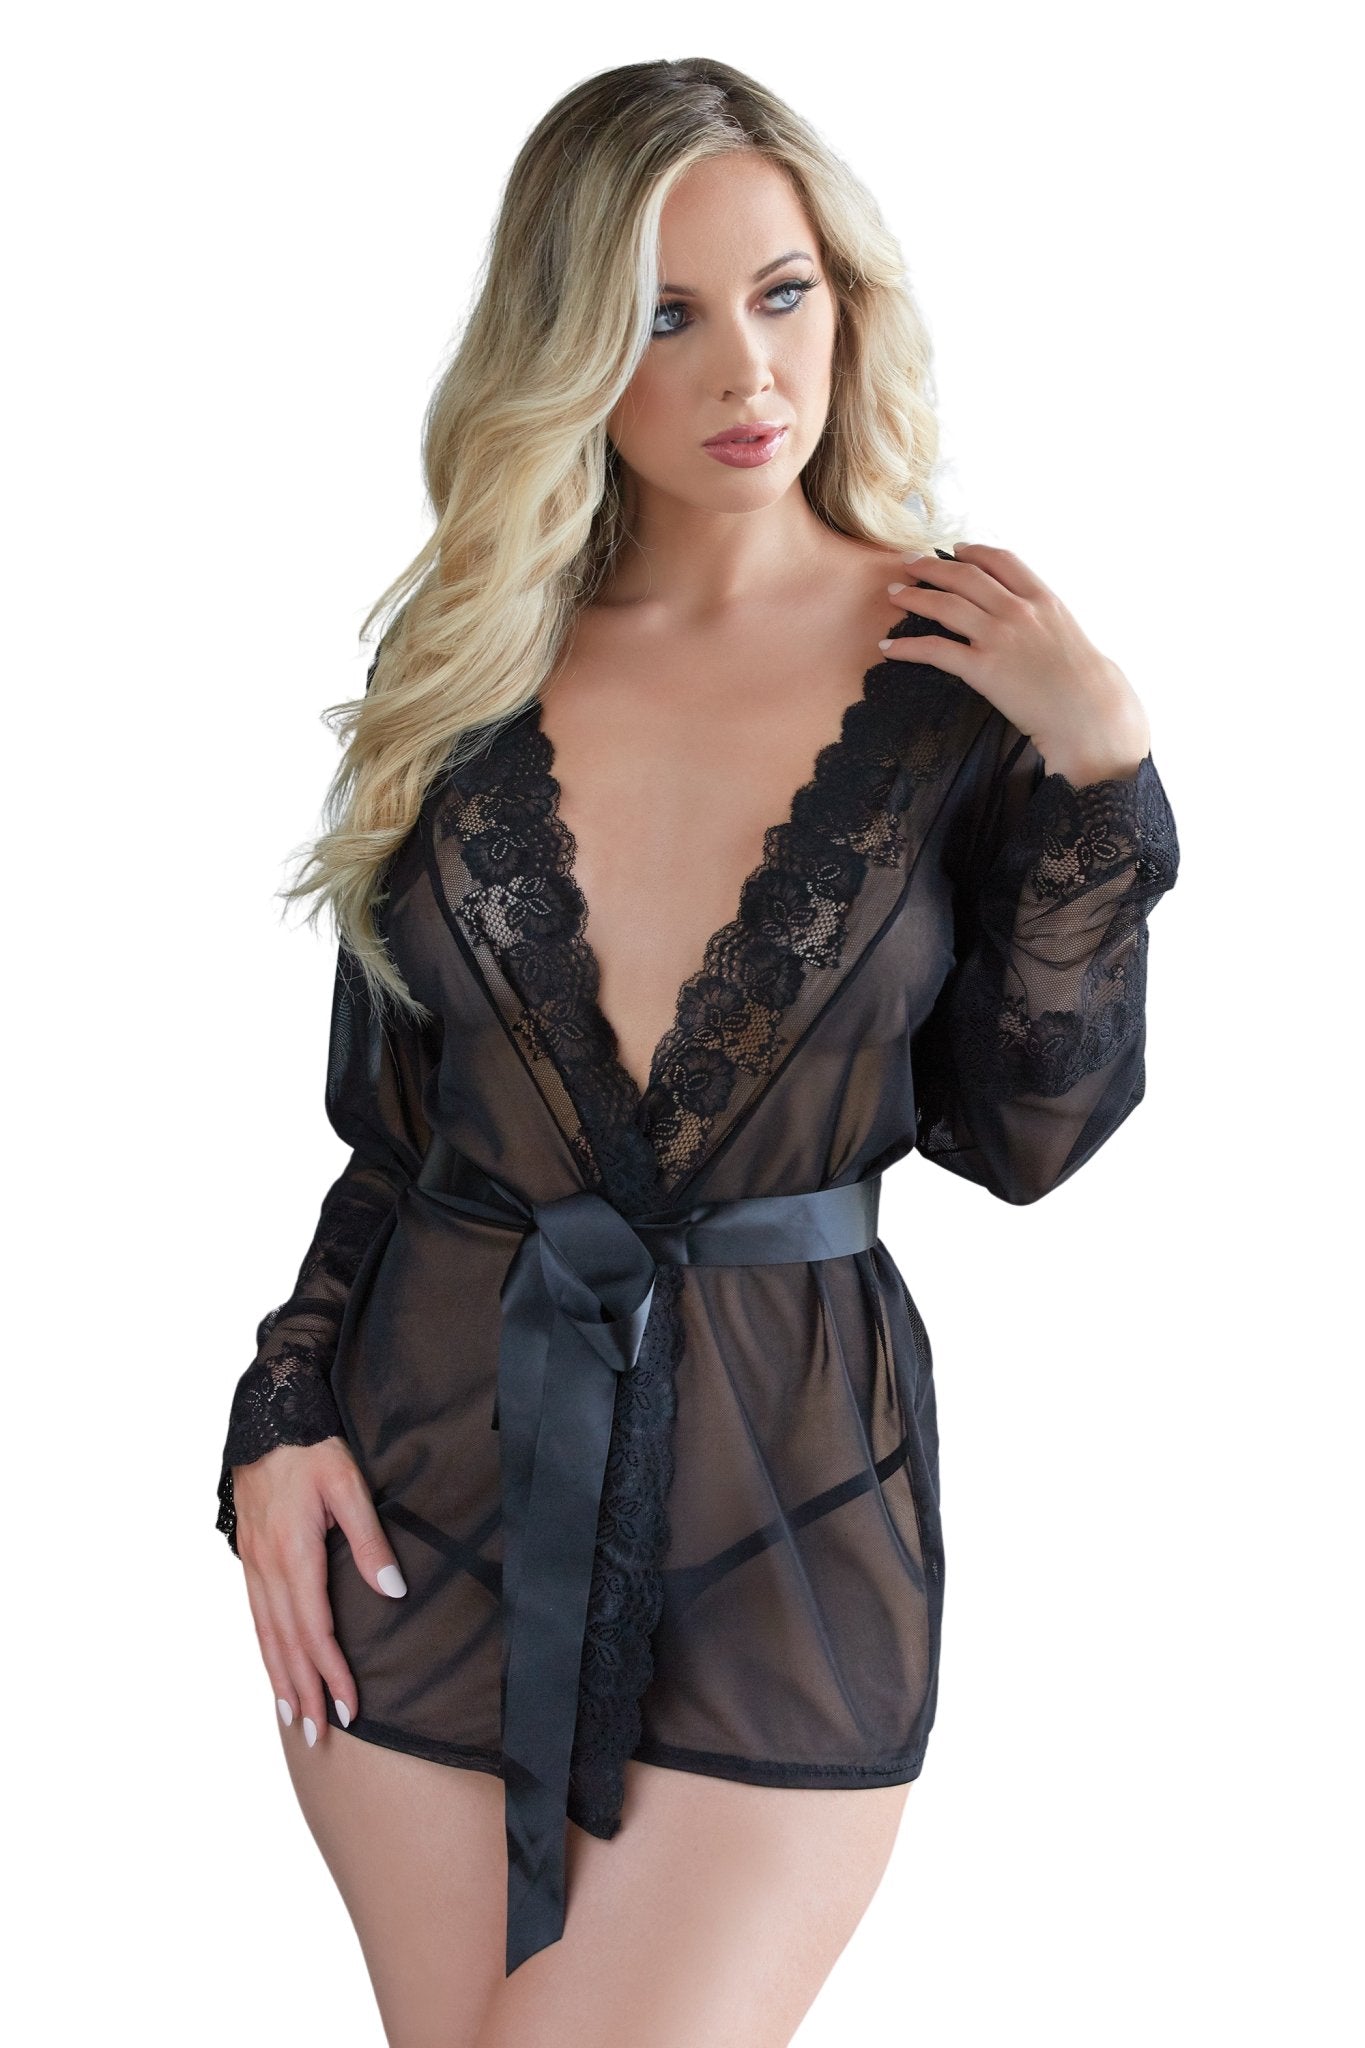 Delicate Lace Robe and G-string Duo Musotica.com